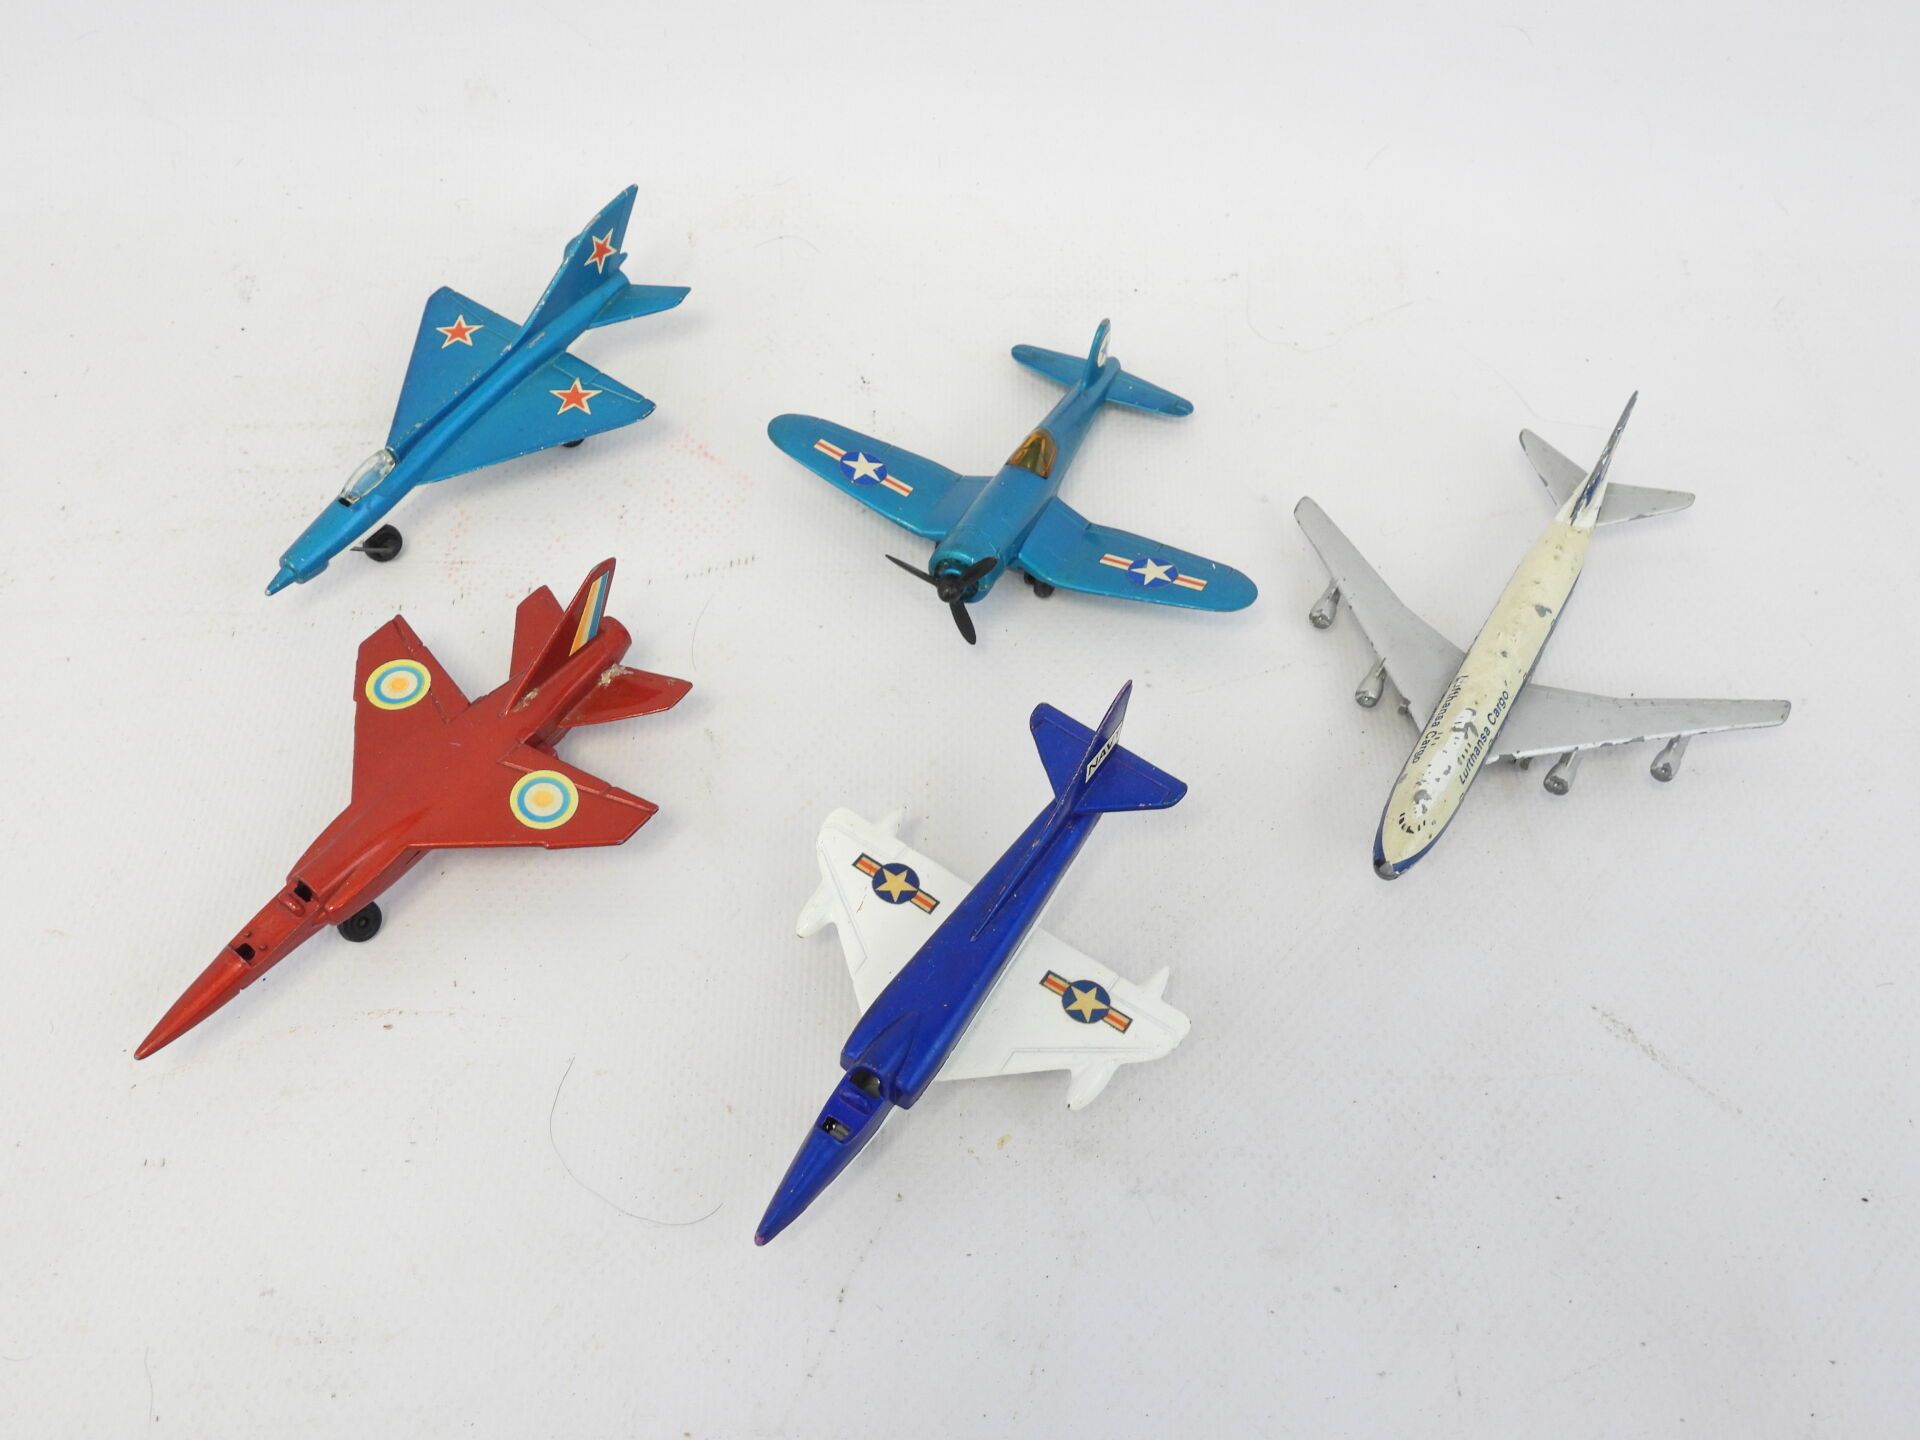 Null MATCHBOX and SCHUCO: Lot of 5 miniature planes in metal. Circa 1970. Worn